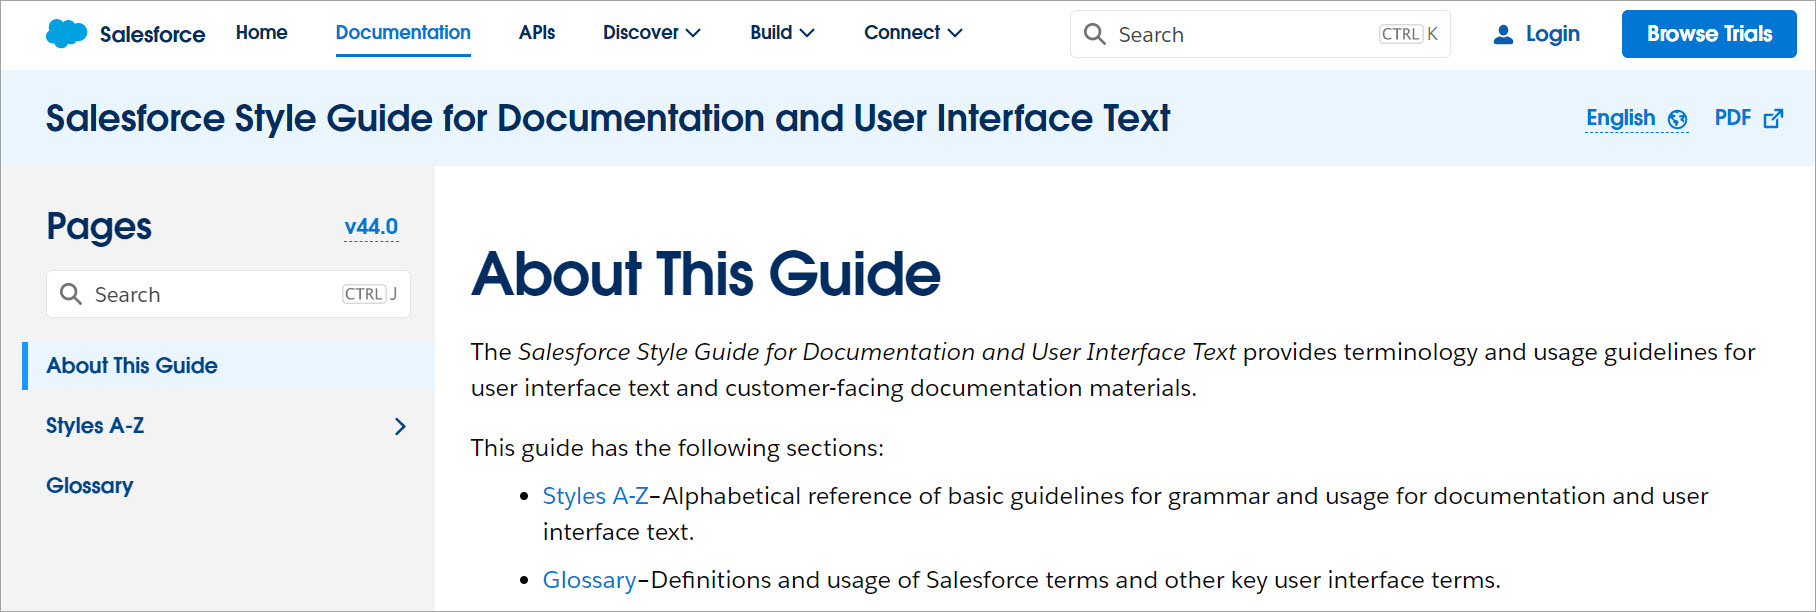 Salesforce Style Guide